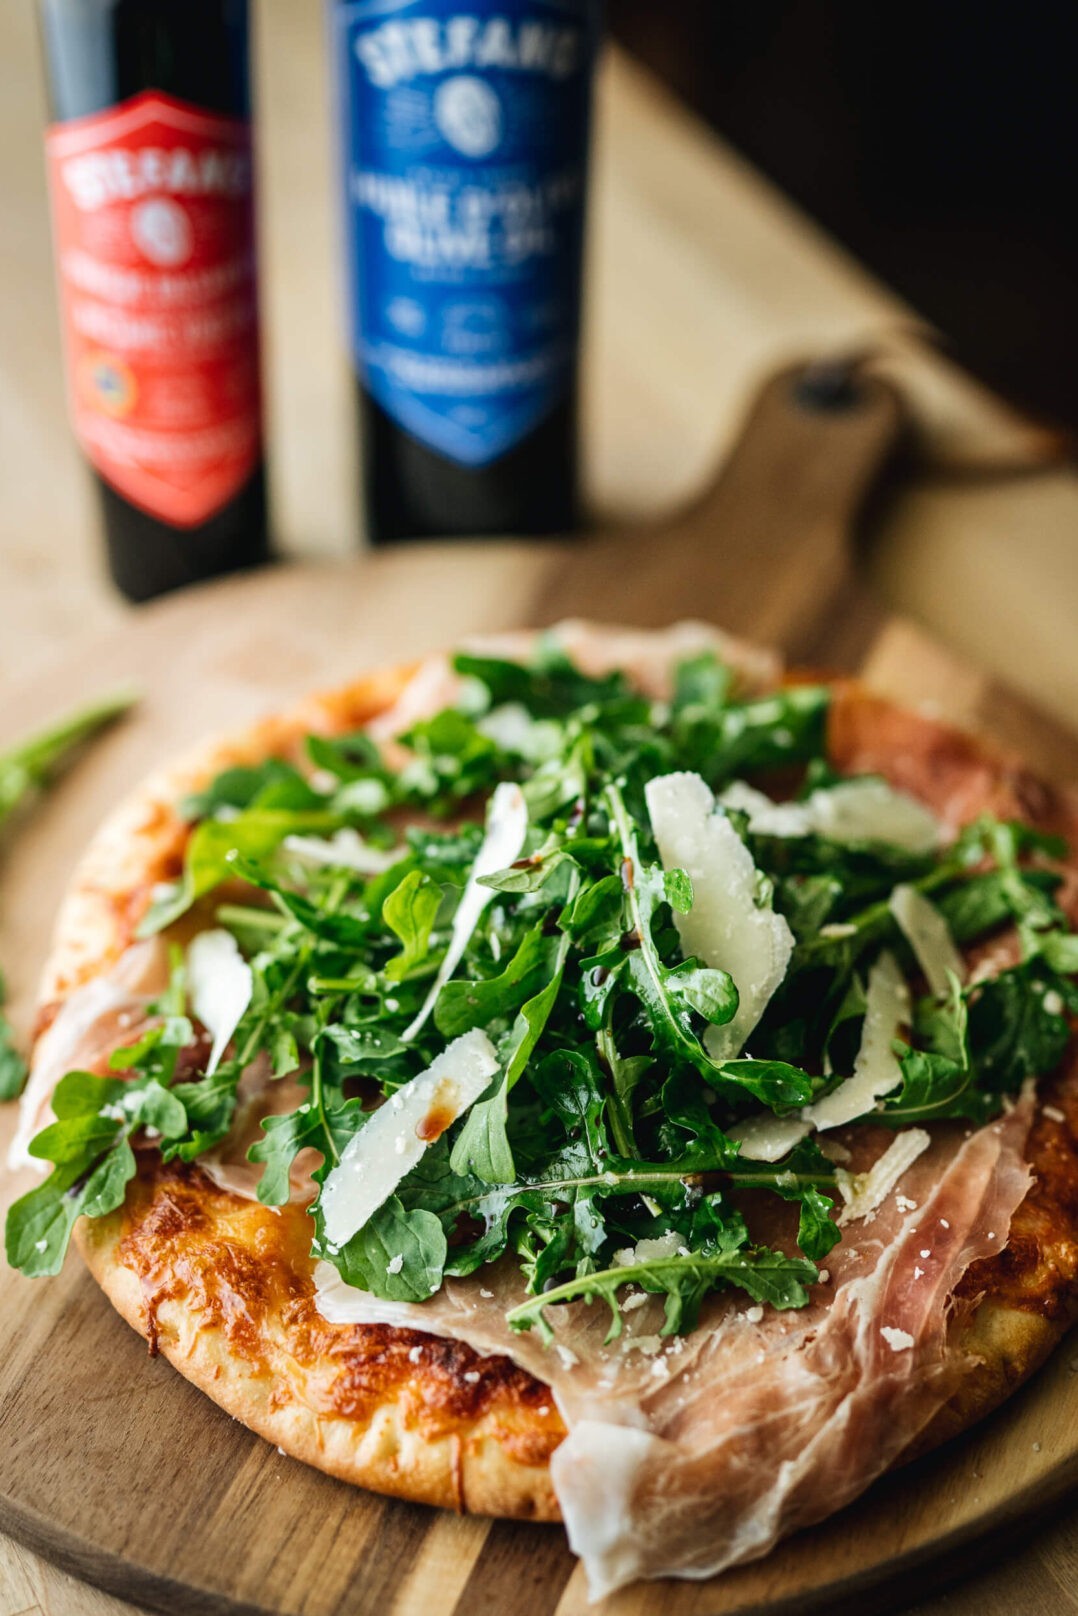 When your craving restaurant-quality pizza, but going out seems like an insurmountable task, all you have to do is make ours your own. Simply rethink what you know of tomato and cheese pizza: not as a dish in itself, but as a canvas and pimp it to your liking. Here, we simply add prosciutto and some arugula salad. Your turn to play!